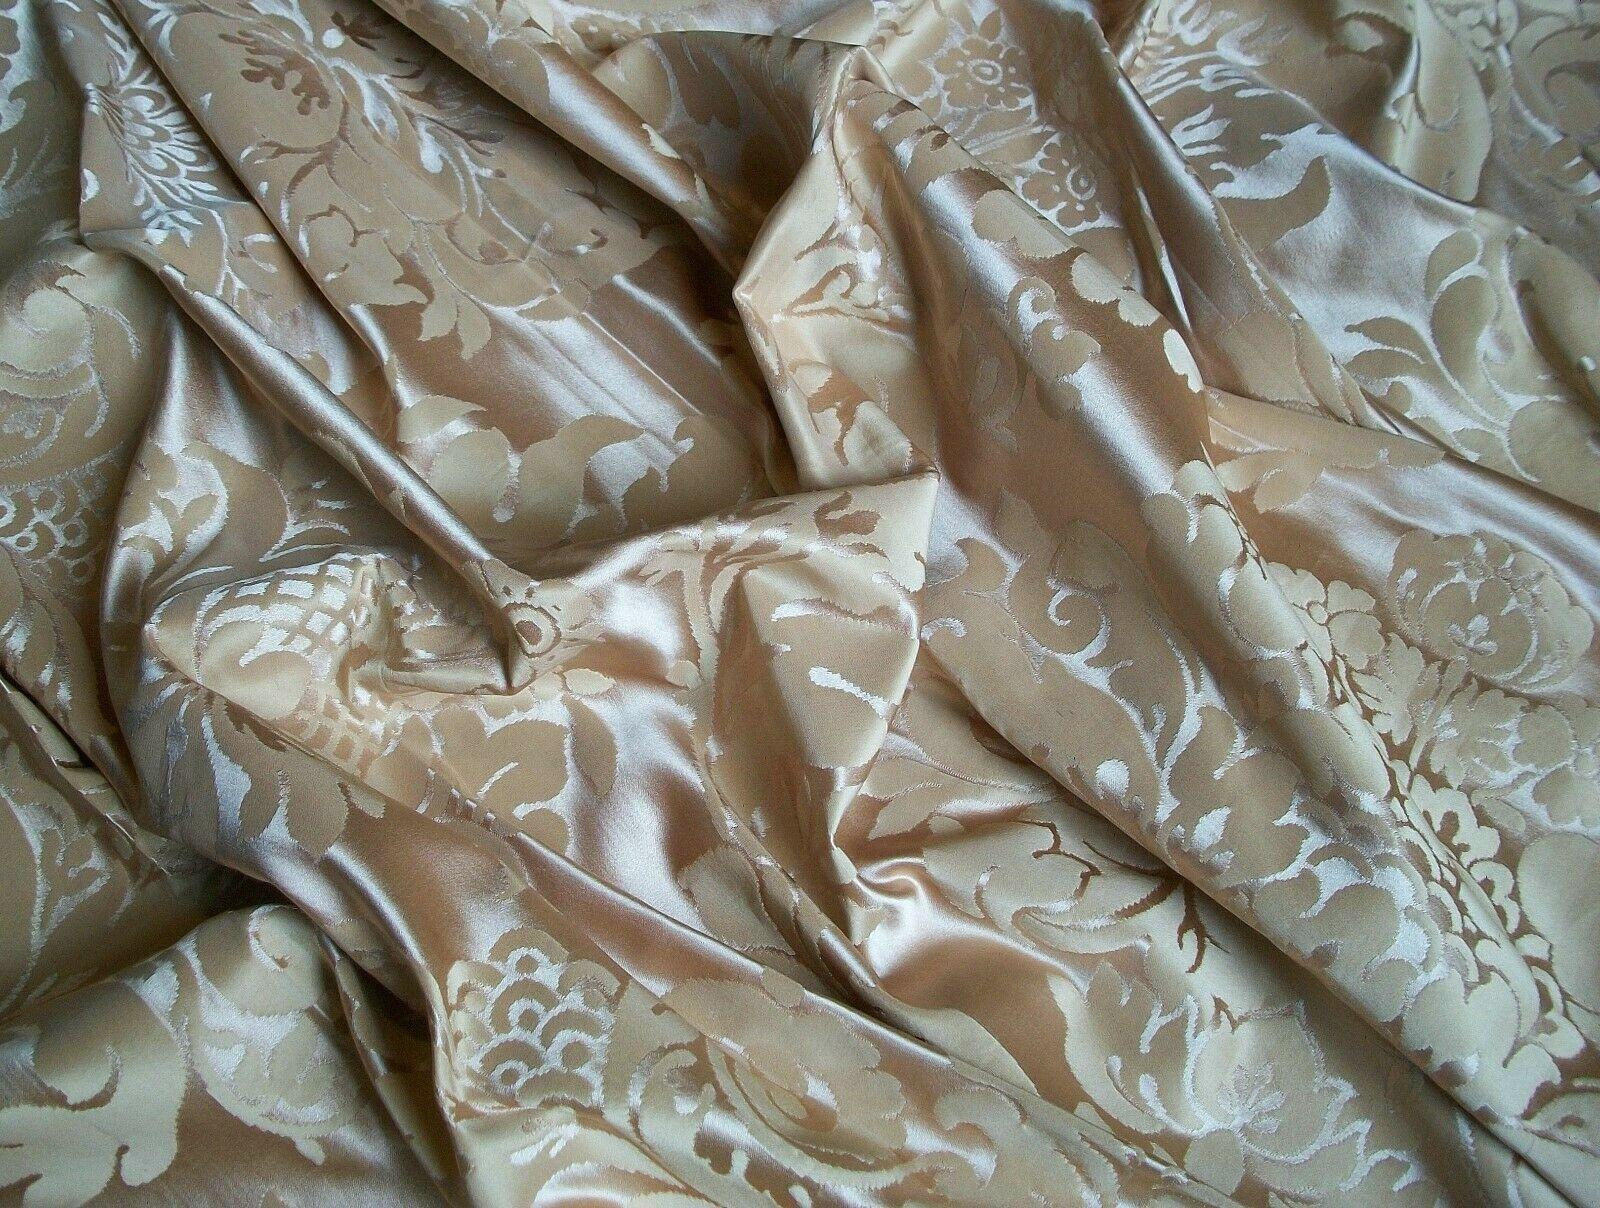 Vintage cotton blend damask fabric remnant - fine designer quality (likely Scalamandre or Brunschwig & Fils) - unknown fiber content - suitable for crafts/pillows/light upholstery - circa 1980's.

Good vintage condition - previously sewn/folded